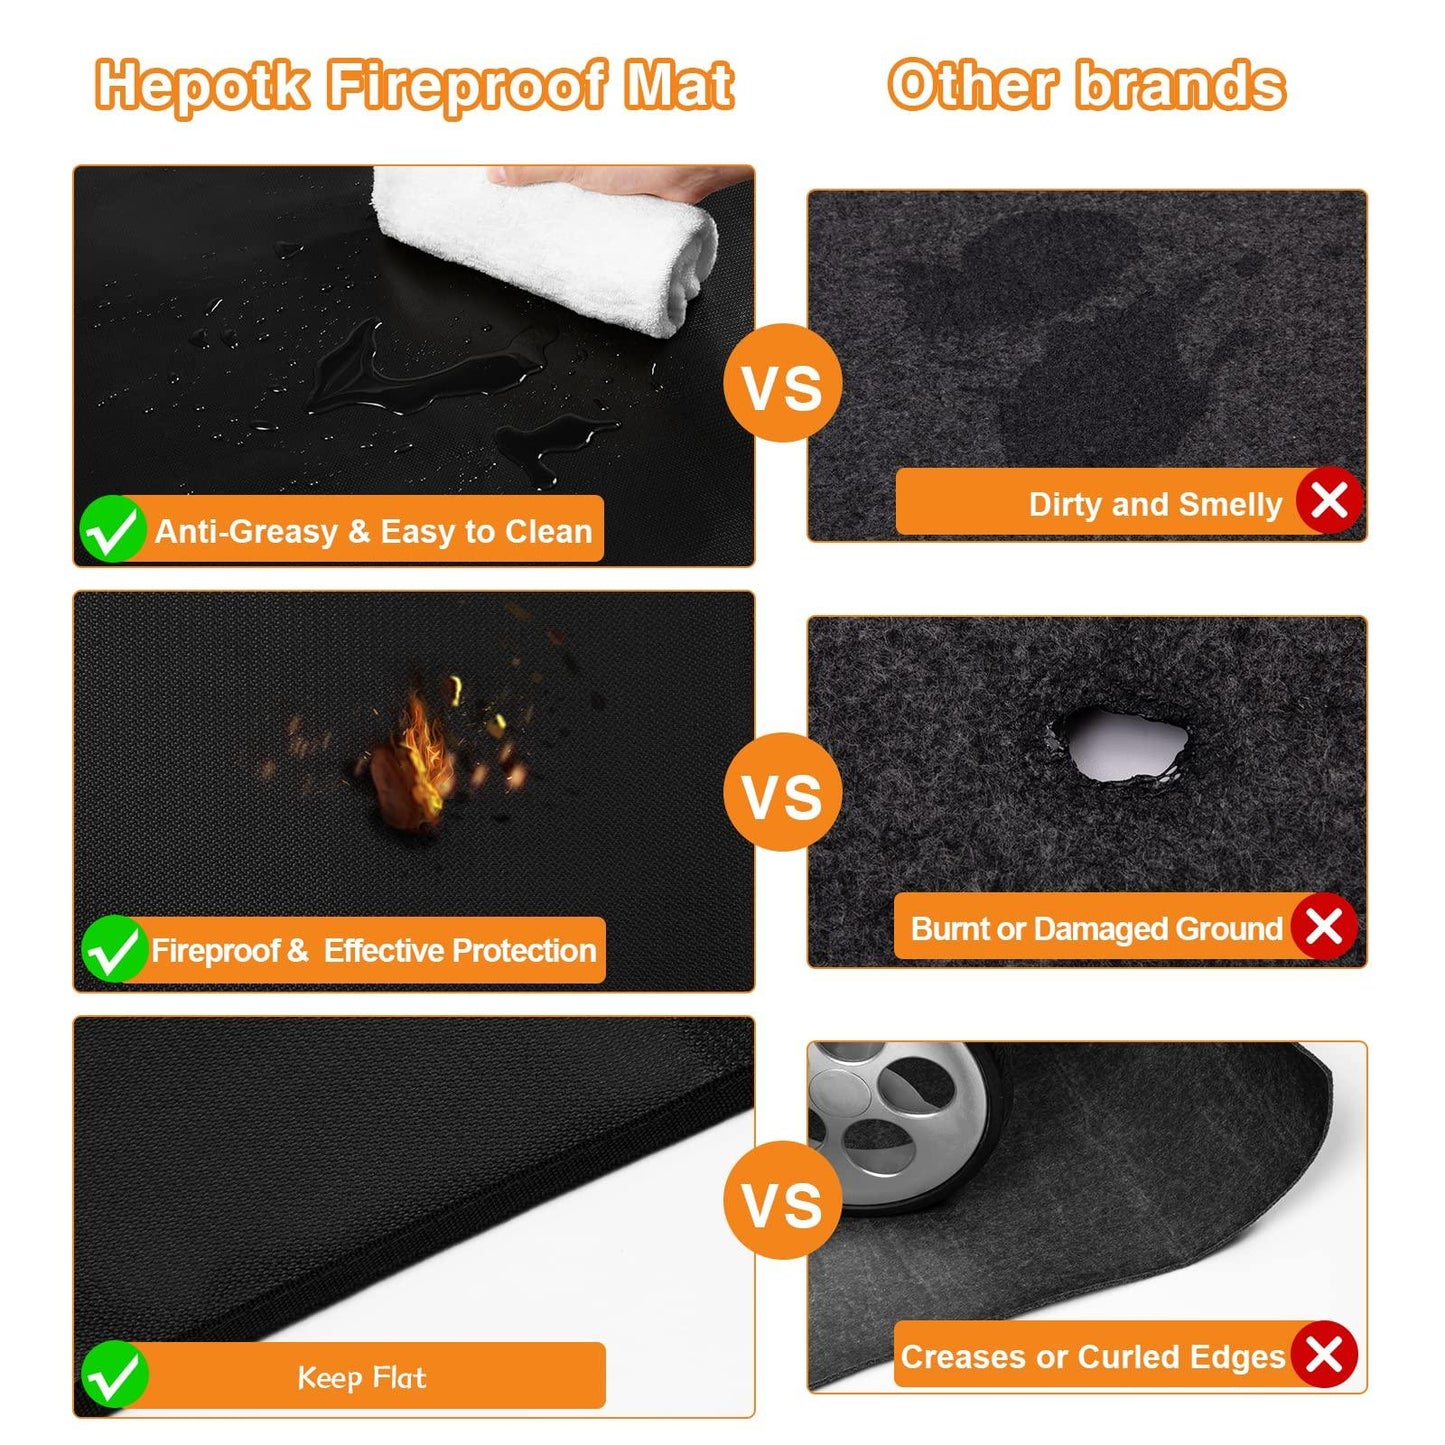 Hepotk Grill Mats for Outdoor Grill - 40 x 70 Inch Fireproof Pit Mat Protects Decks and Patio - Oil-Proof & Waterproof Grill Pad for Fire Pit - CookCave